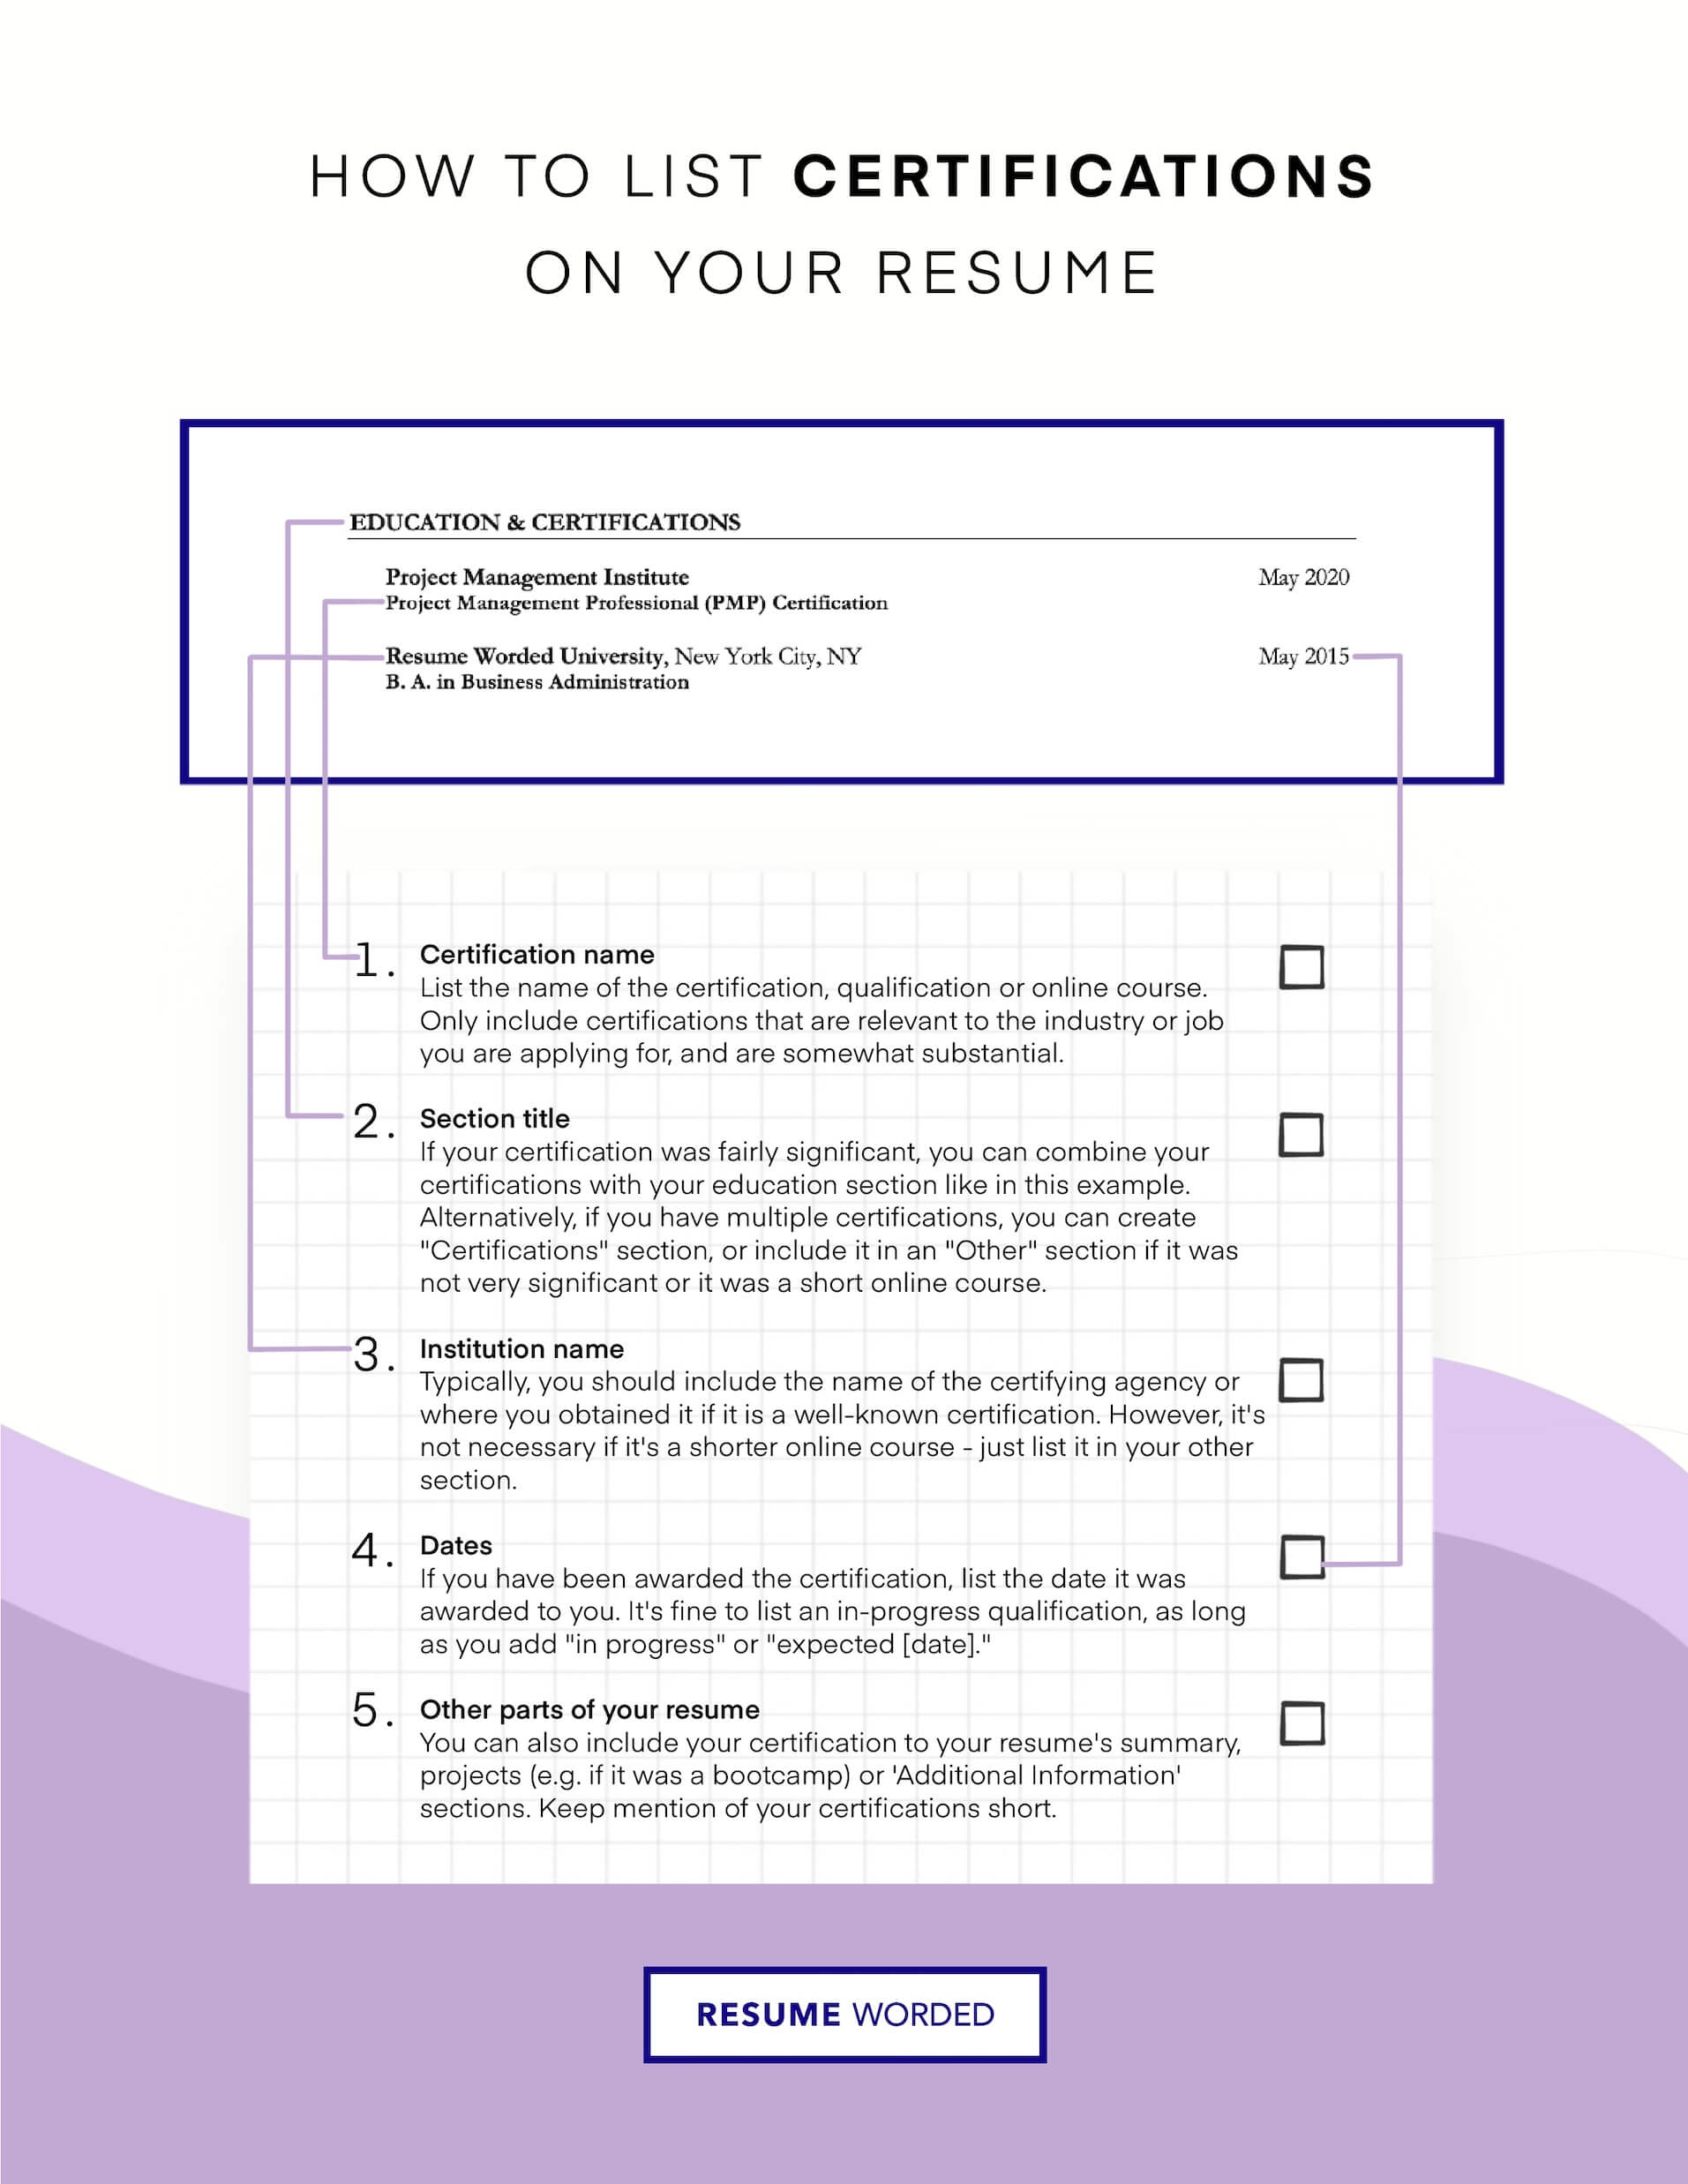 Make sure you are Azure certified. - Azure Data Engineer Resume